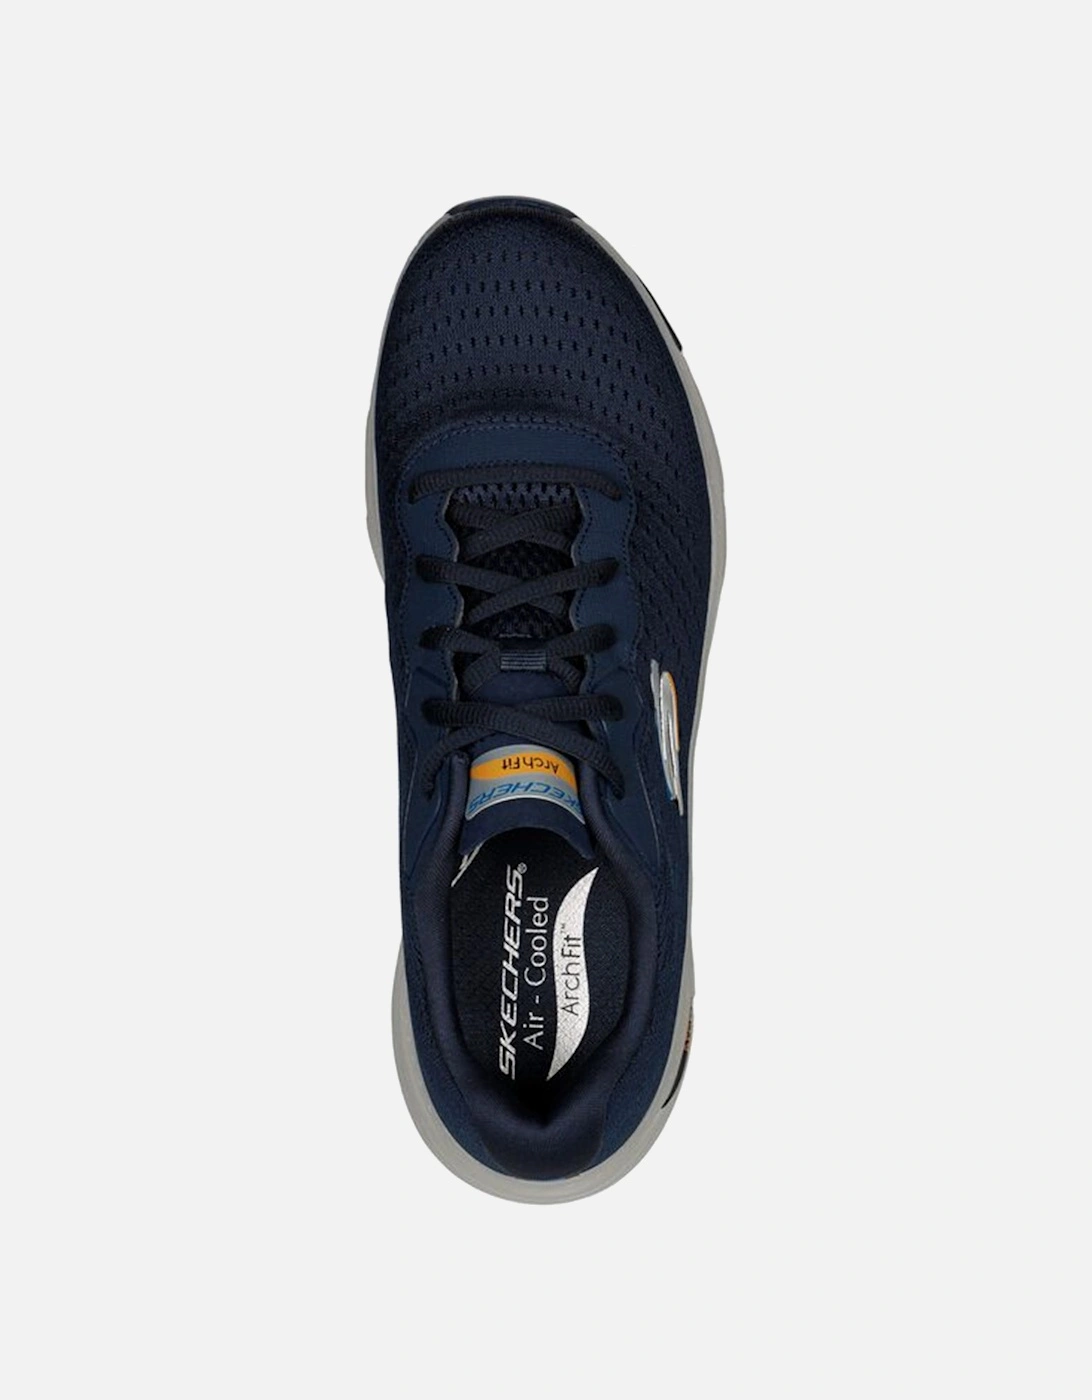 Mens Arch Fit Infinity Trainers (Navy)